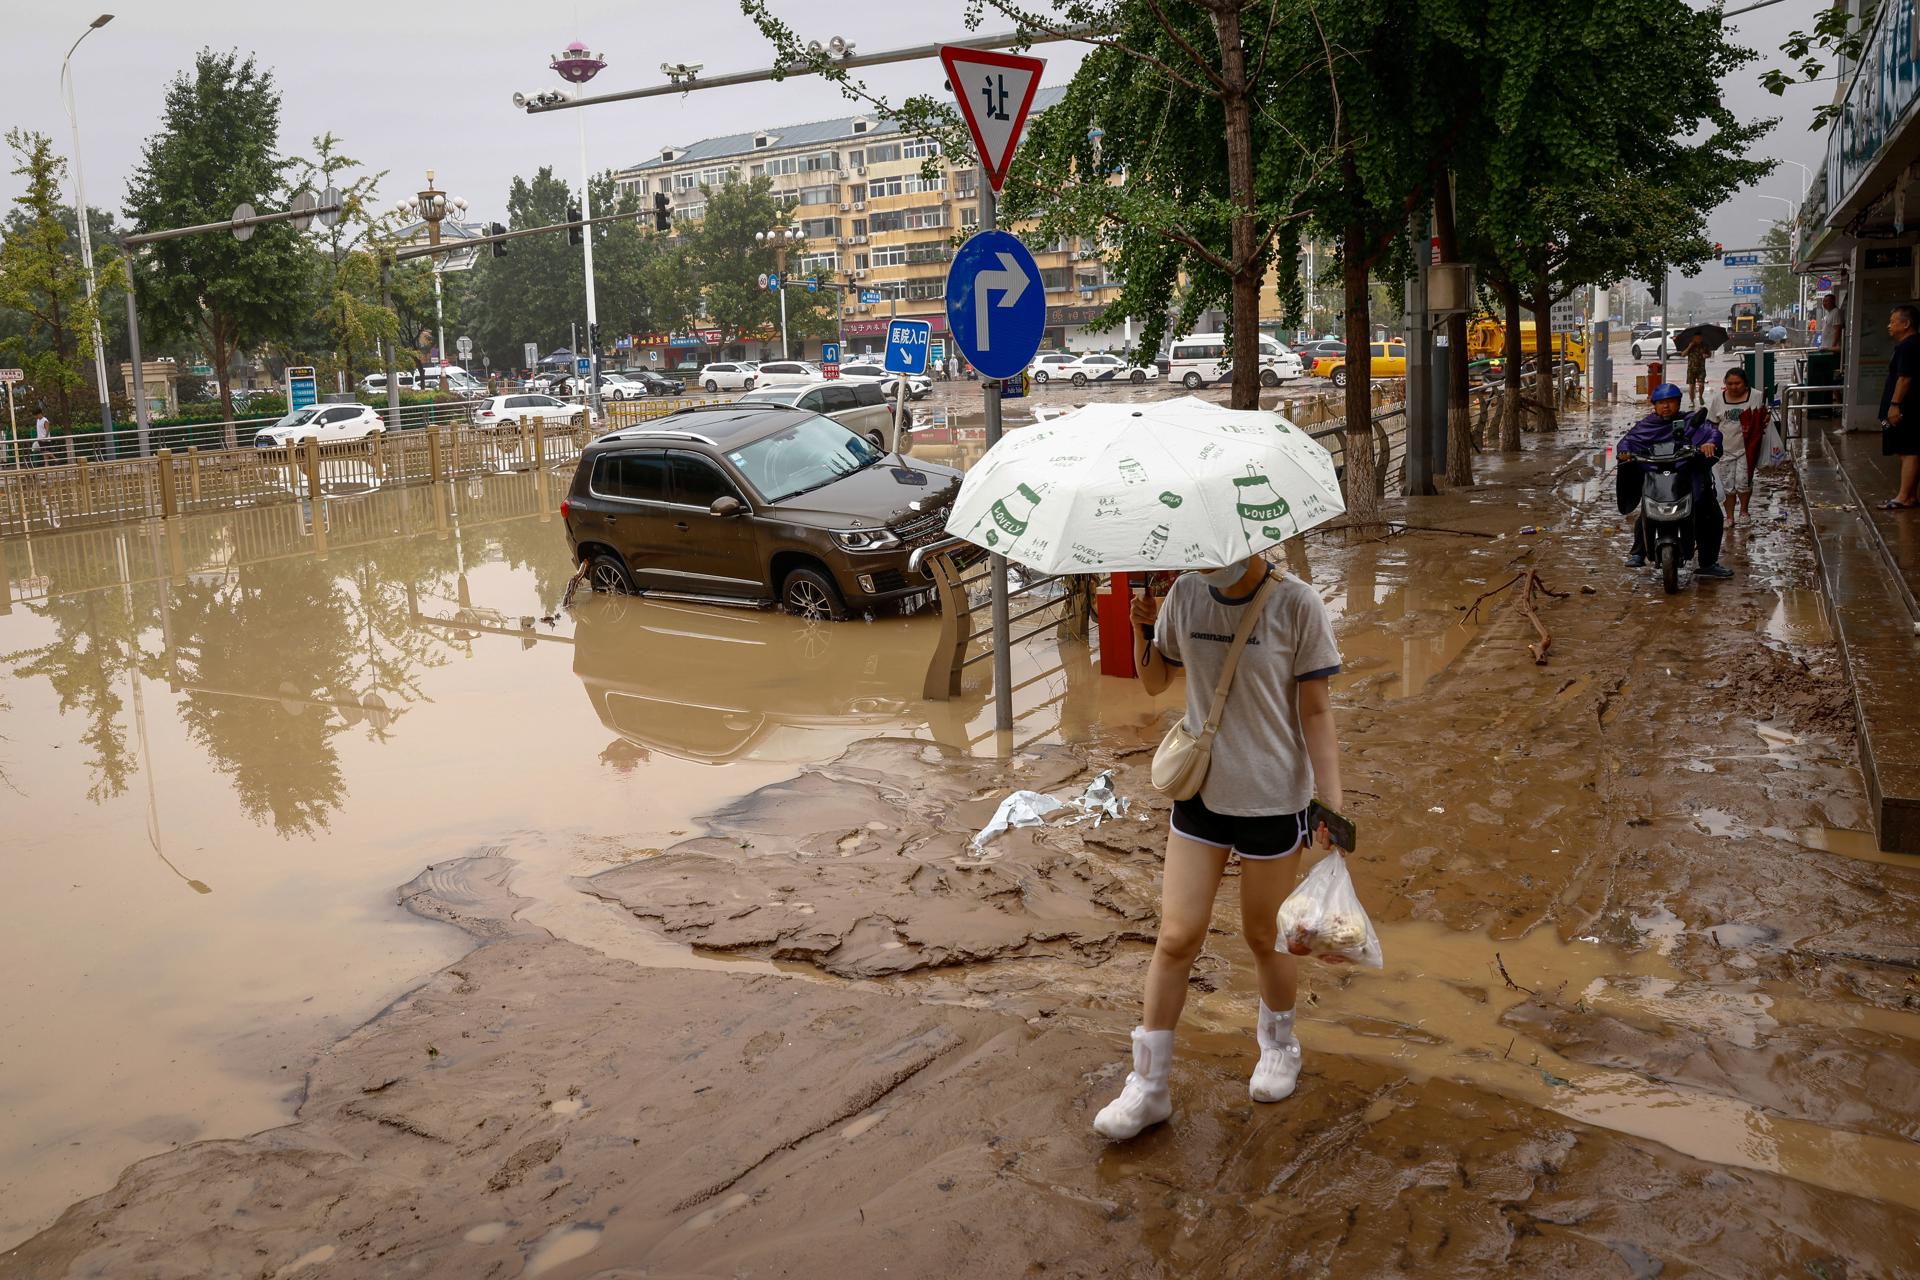 A woman walks on a muddy street next to damaged by flood cars during a downpour in Mentougou District, west of Beijing, China, 01 August 2023. EFE-EPA/MARK R. CRISTINO